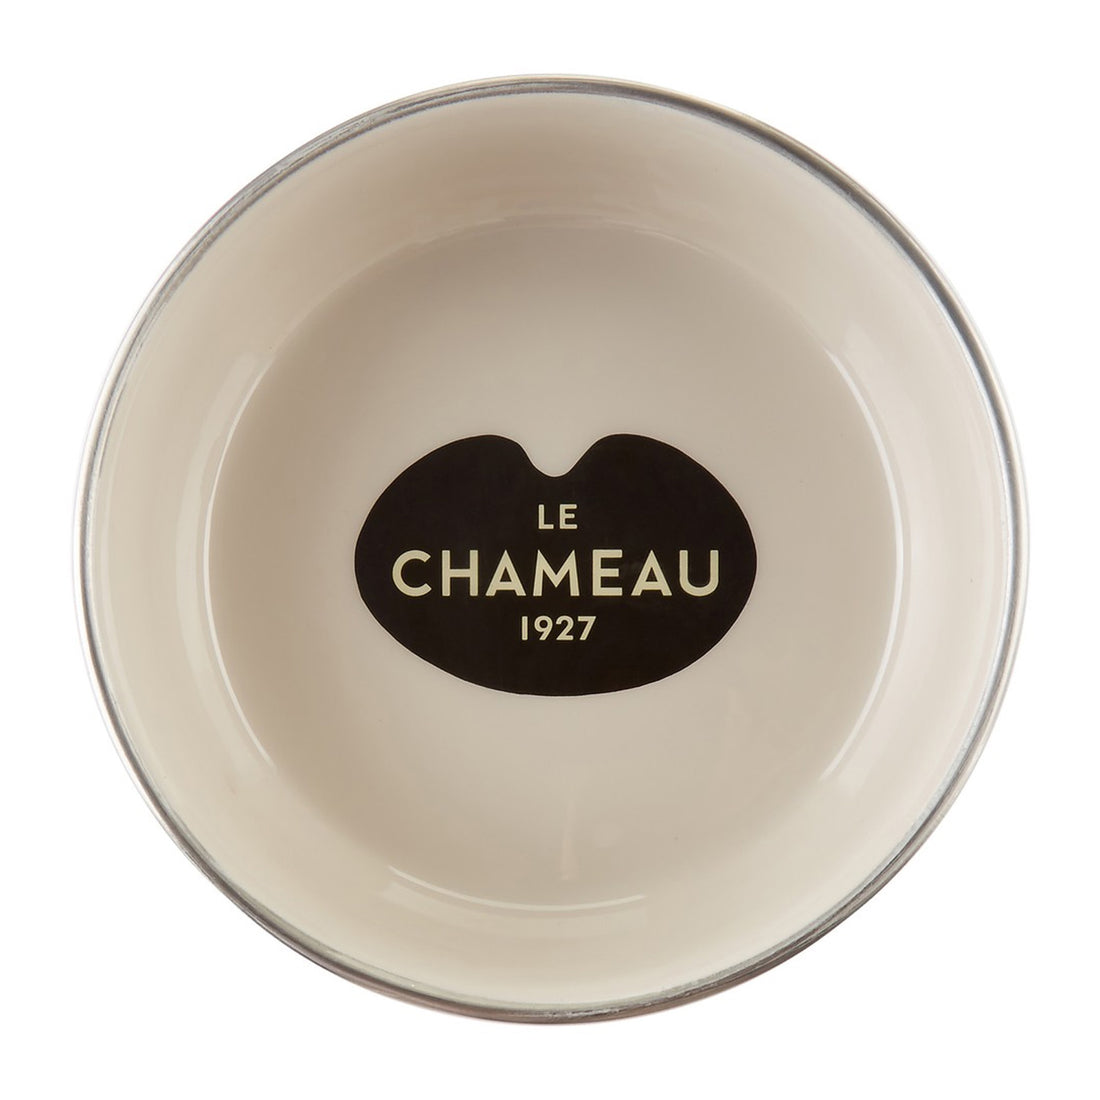 Le-Chameau-Small-Stainless-Steel-Dog-Bowl